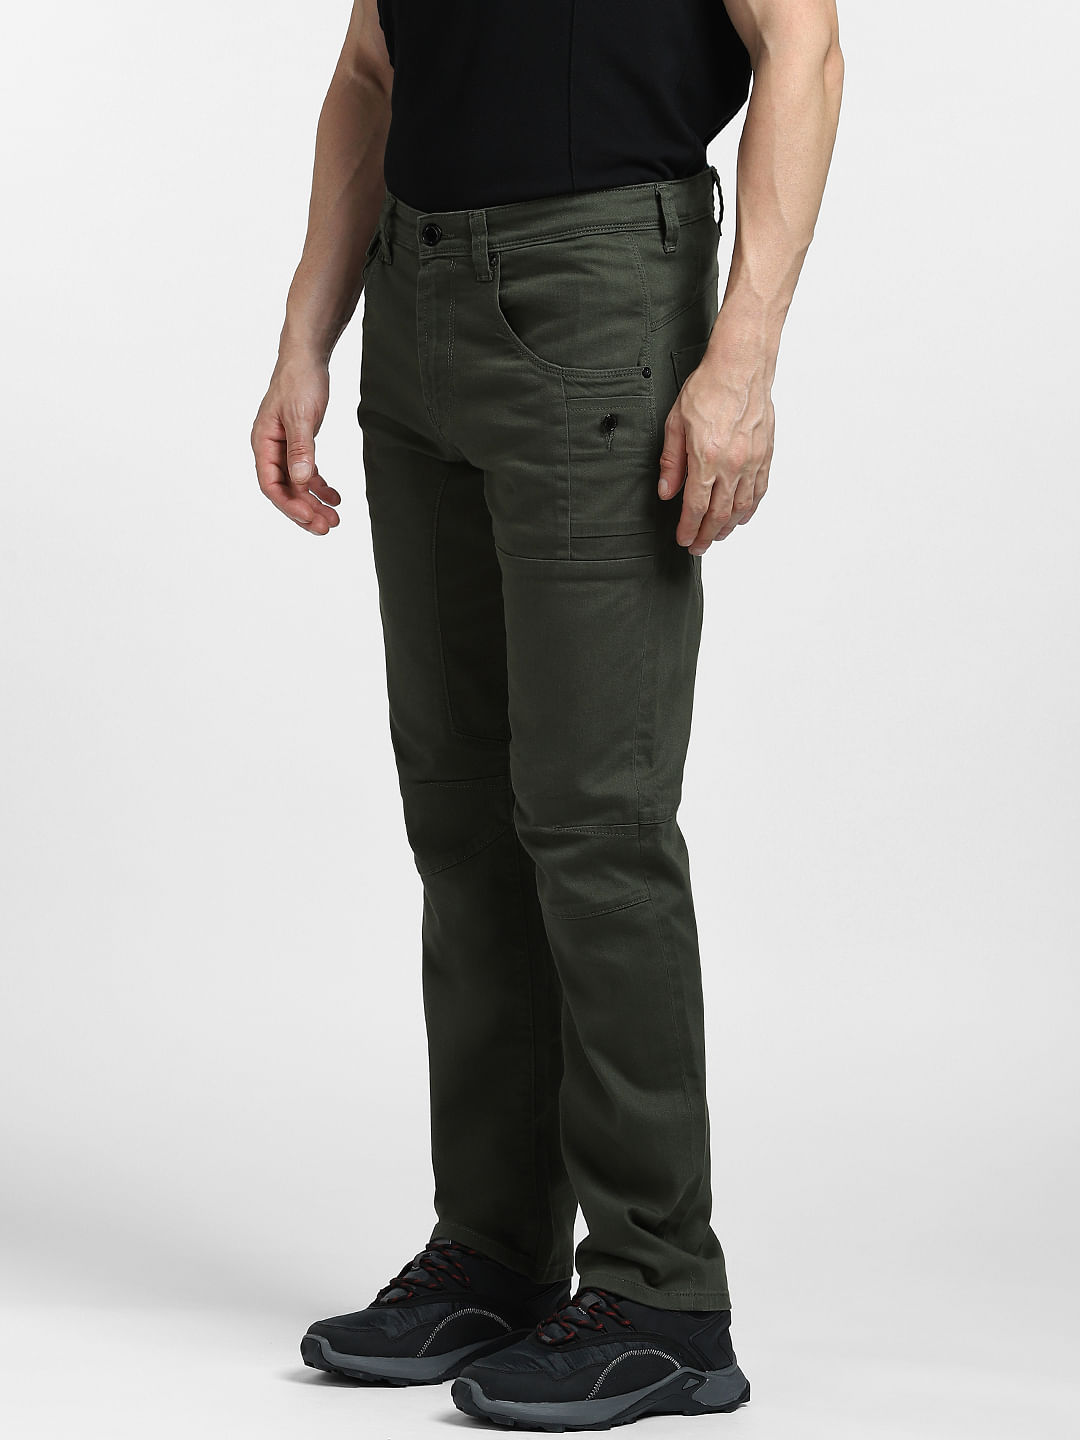 Buy Charcoal Black Trousers & Pants for Men by Buda Jeans Co Online |  Ajio.com